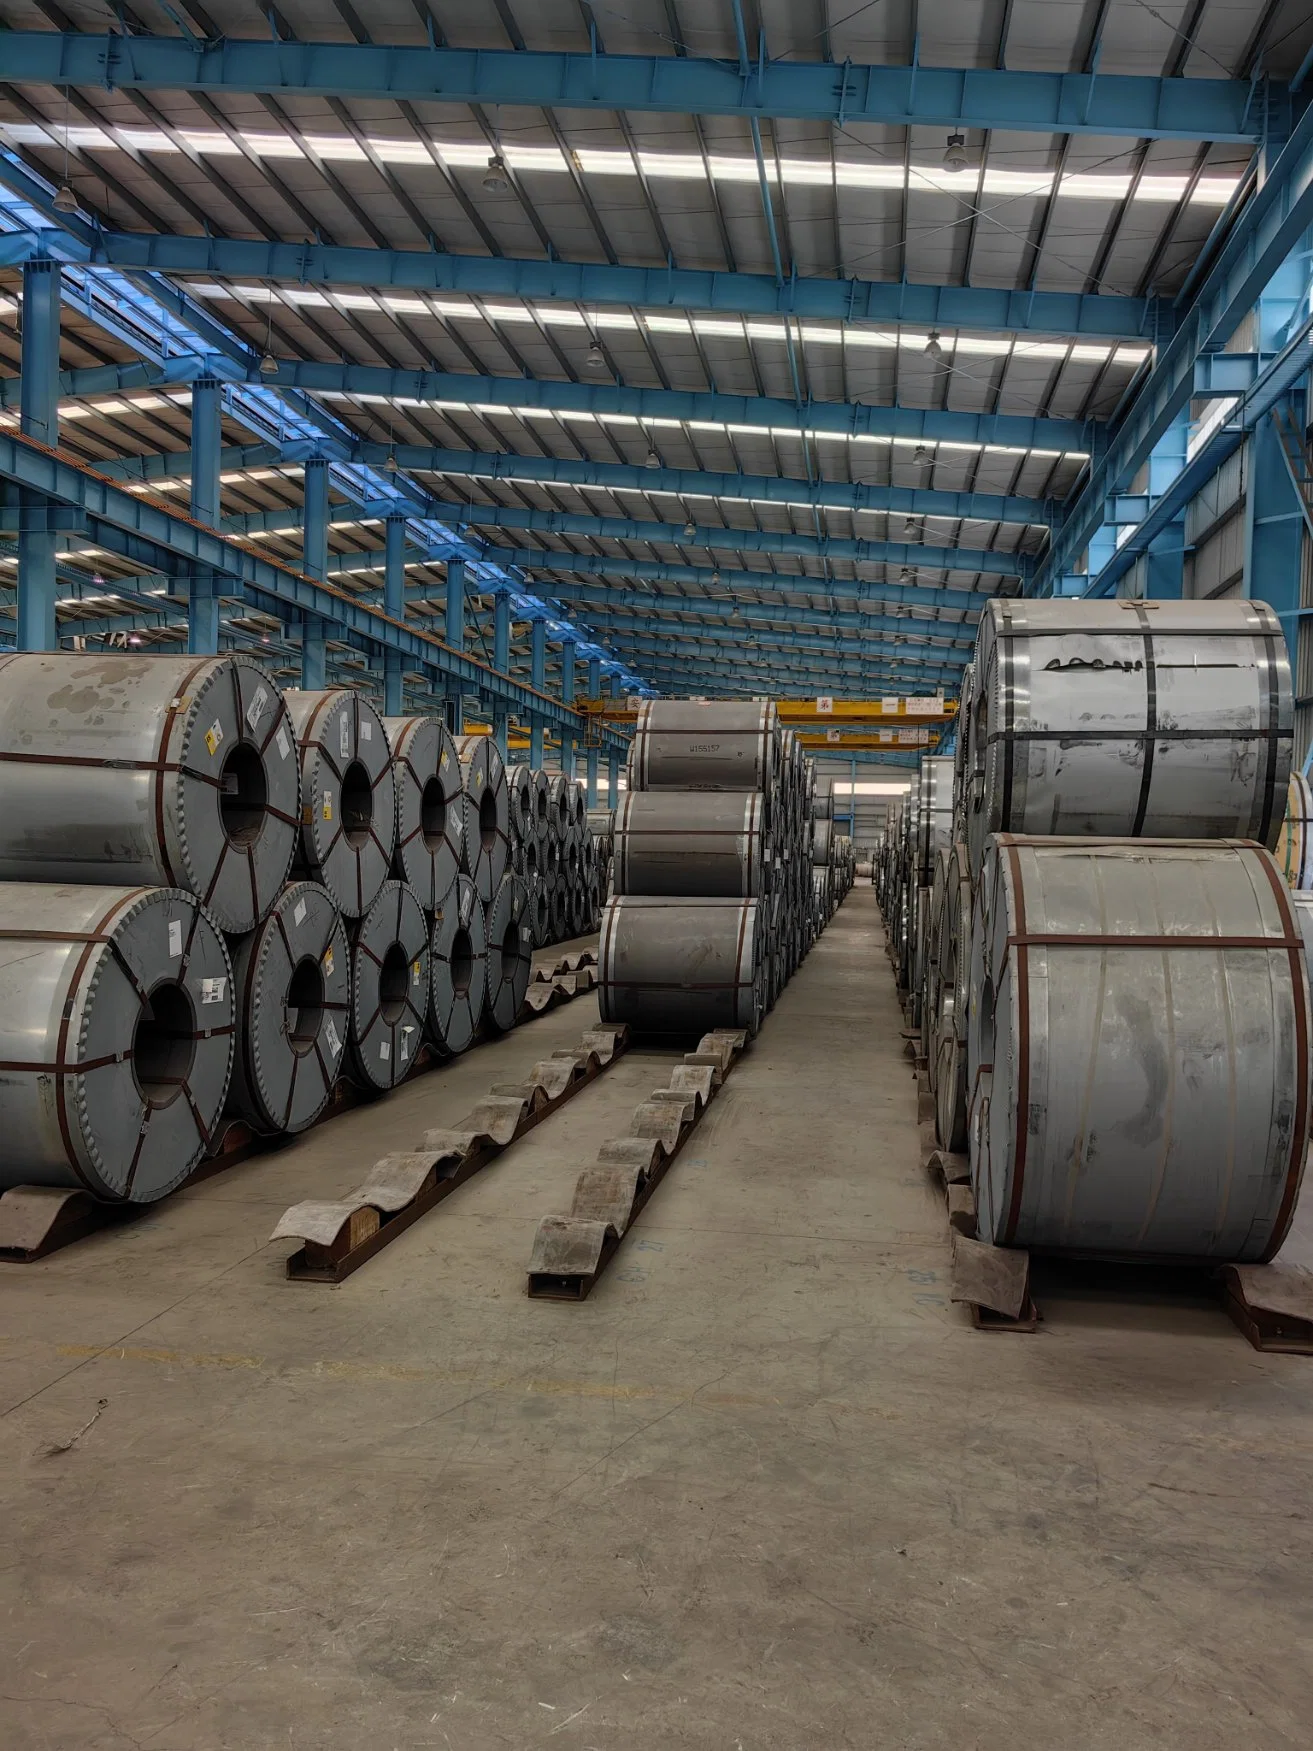 Oriented Electrical Steel Grade 30P105 Used for Dry Type Transformer